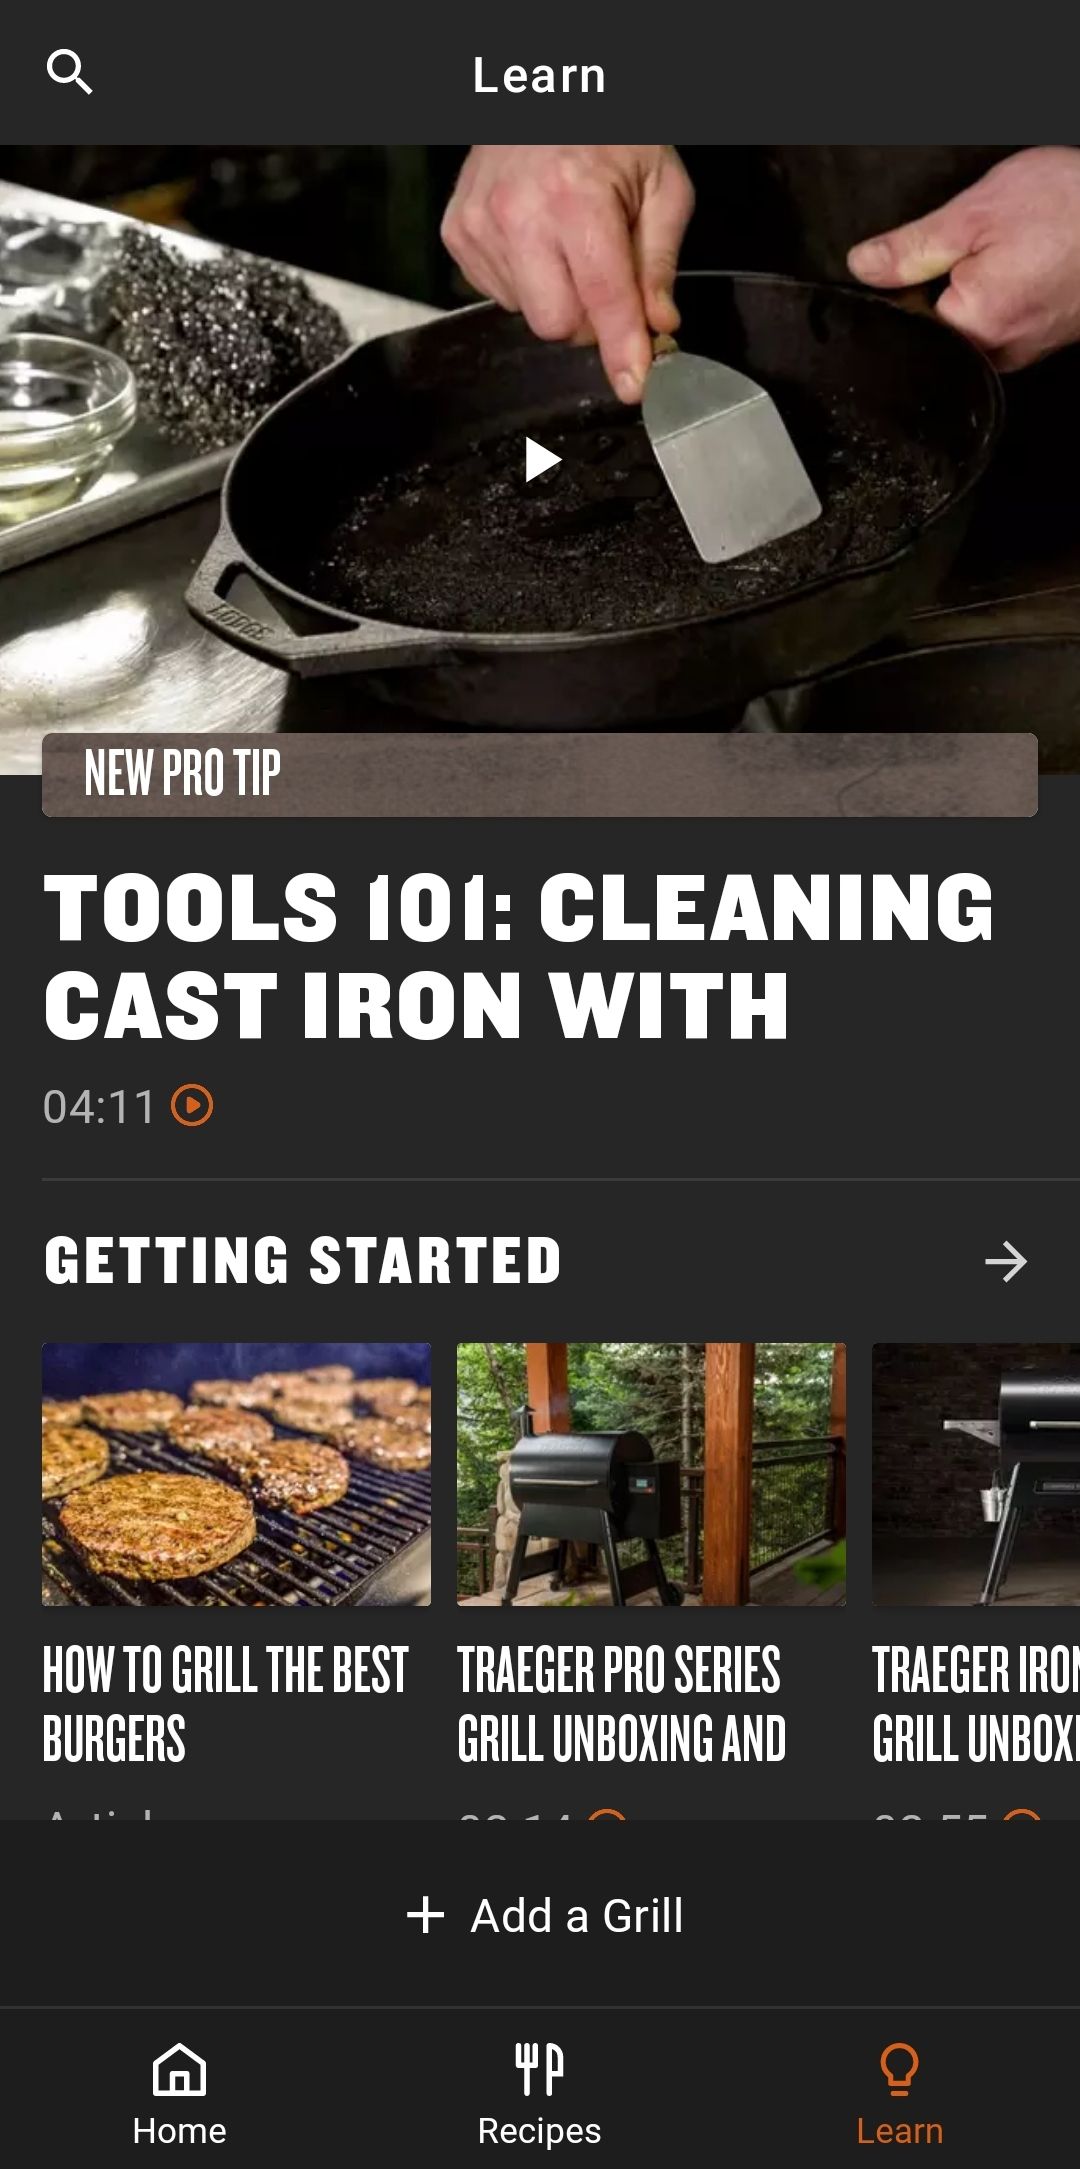 The "Learn" tab in Traeger is full of good advice and helpful techniques